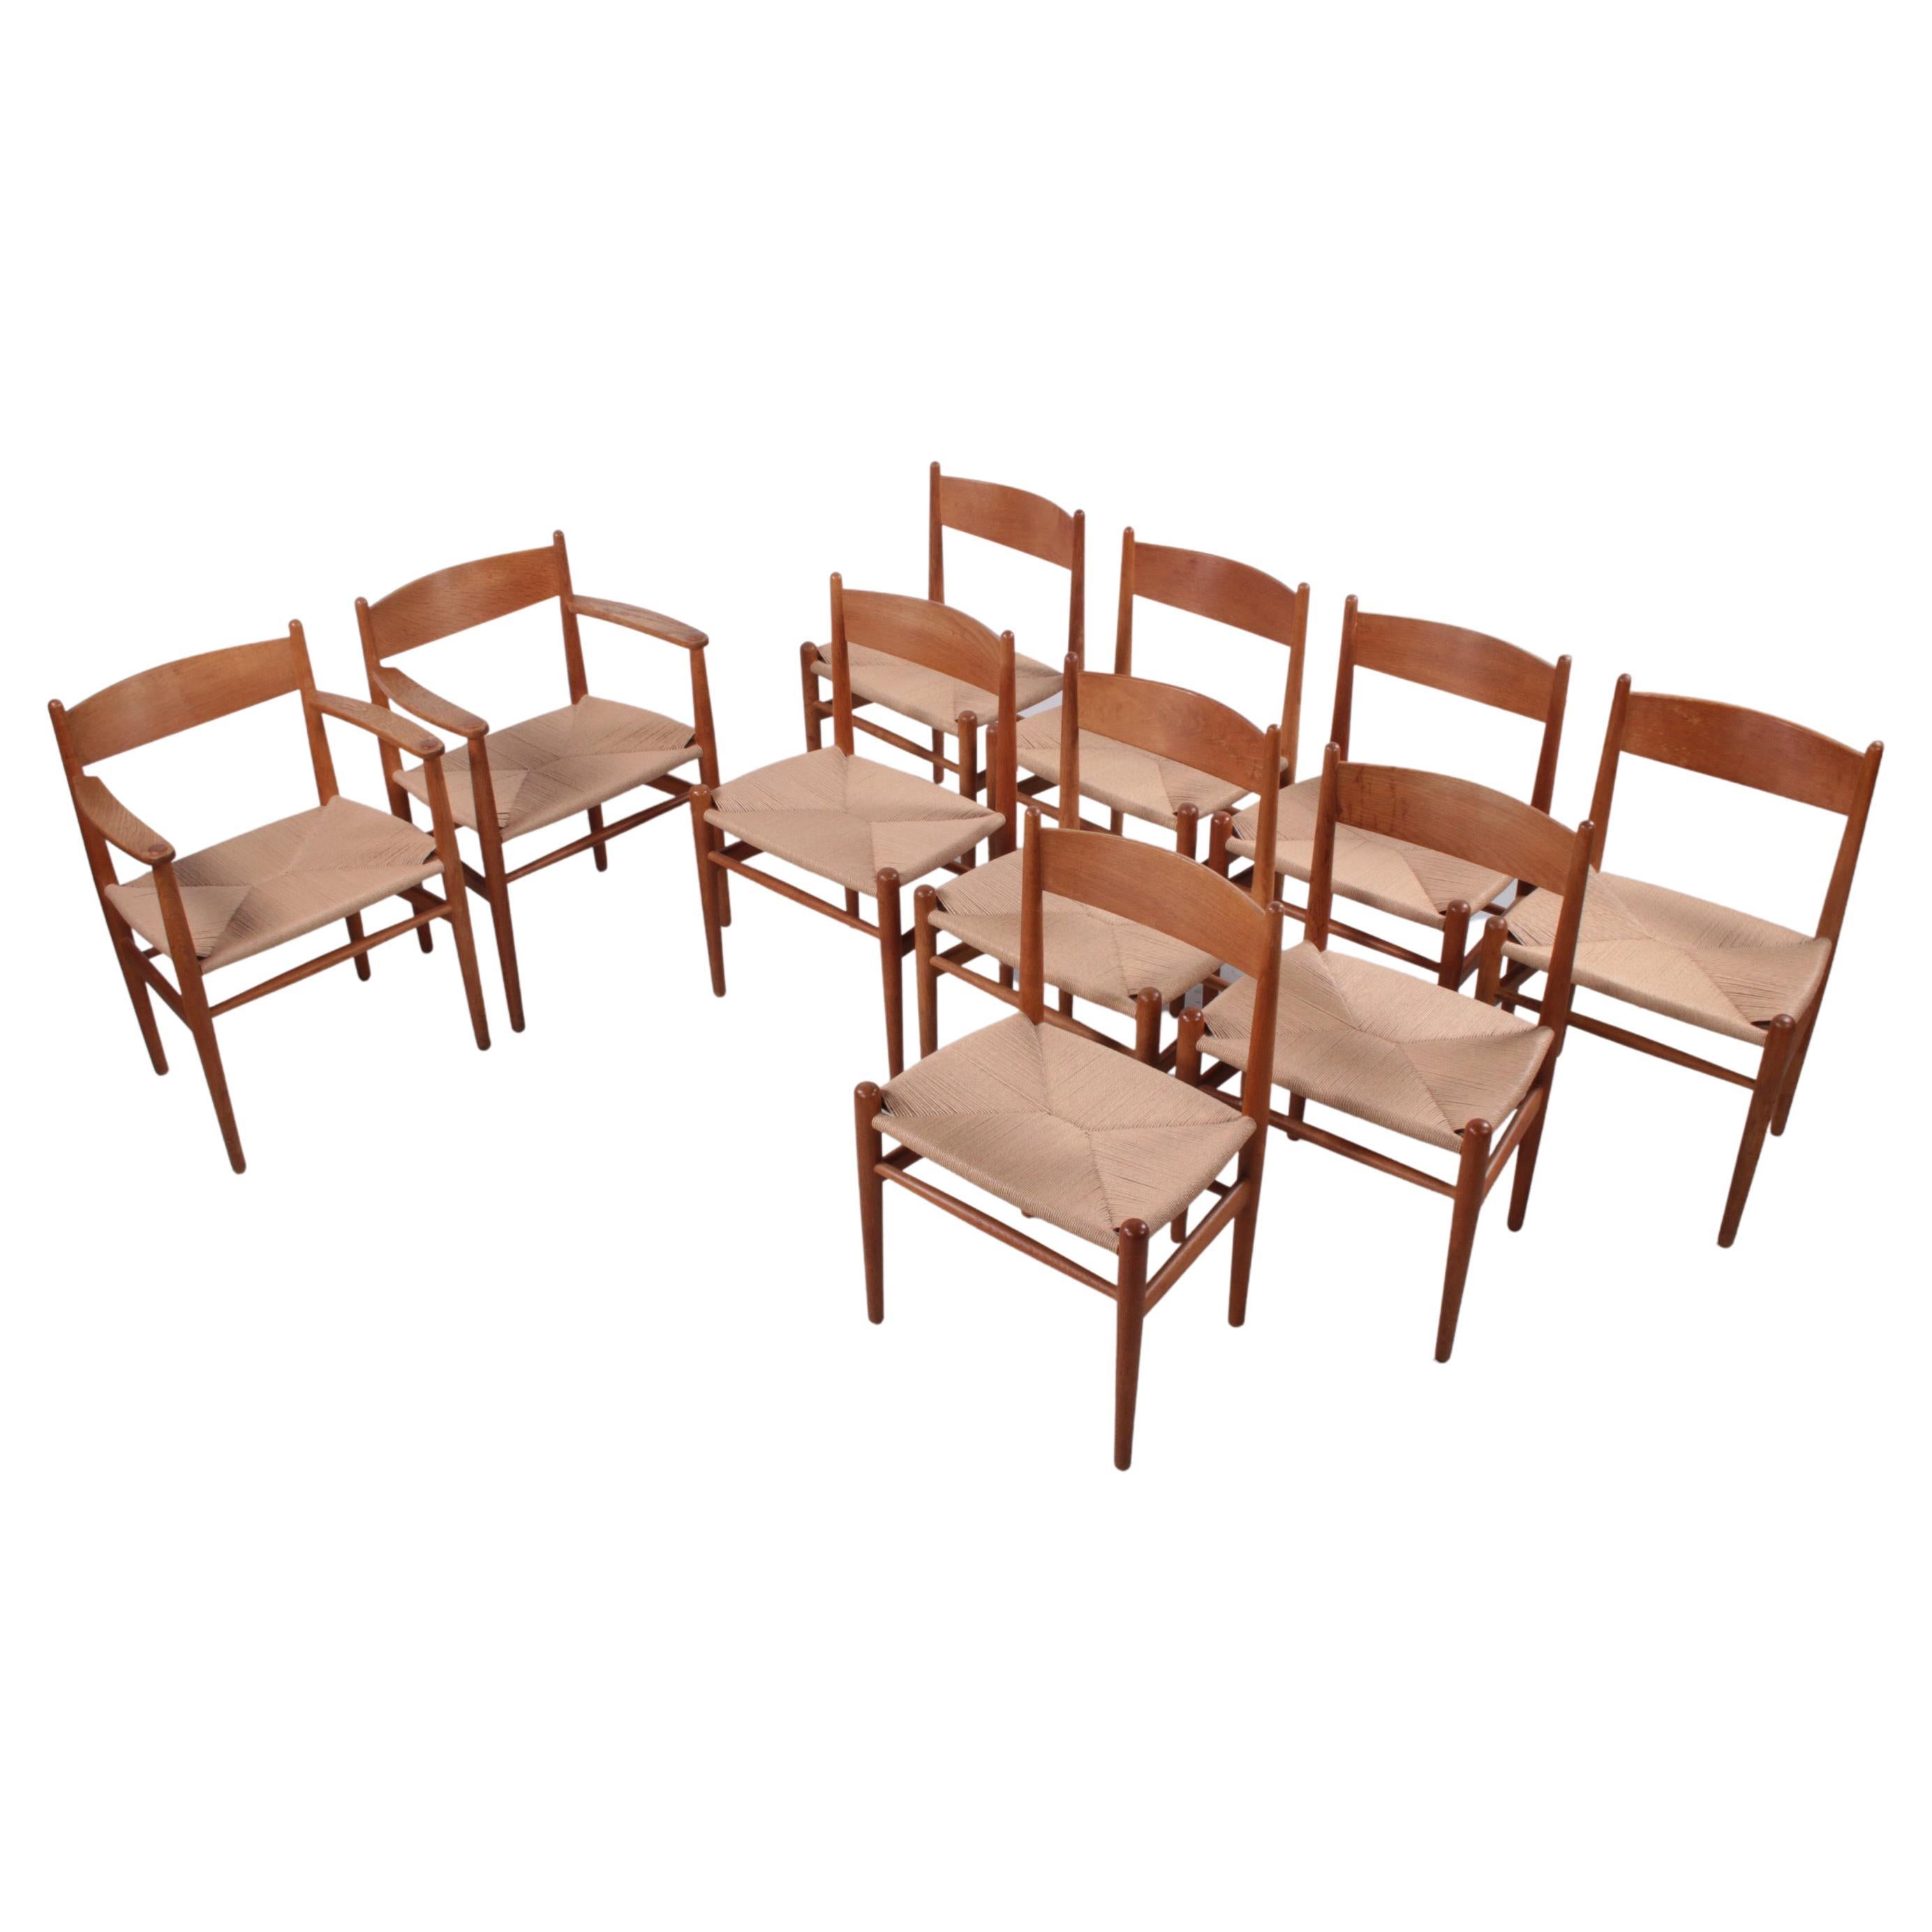 10 CH36' and CH37 Dining Chairs by Hans Wegner for Carl Hansen & Søn, Denma